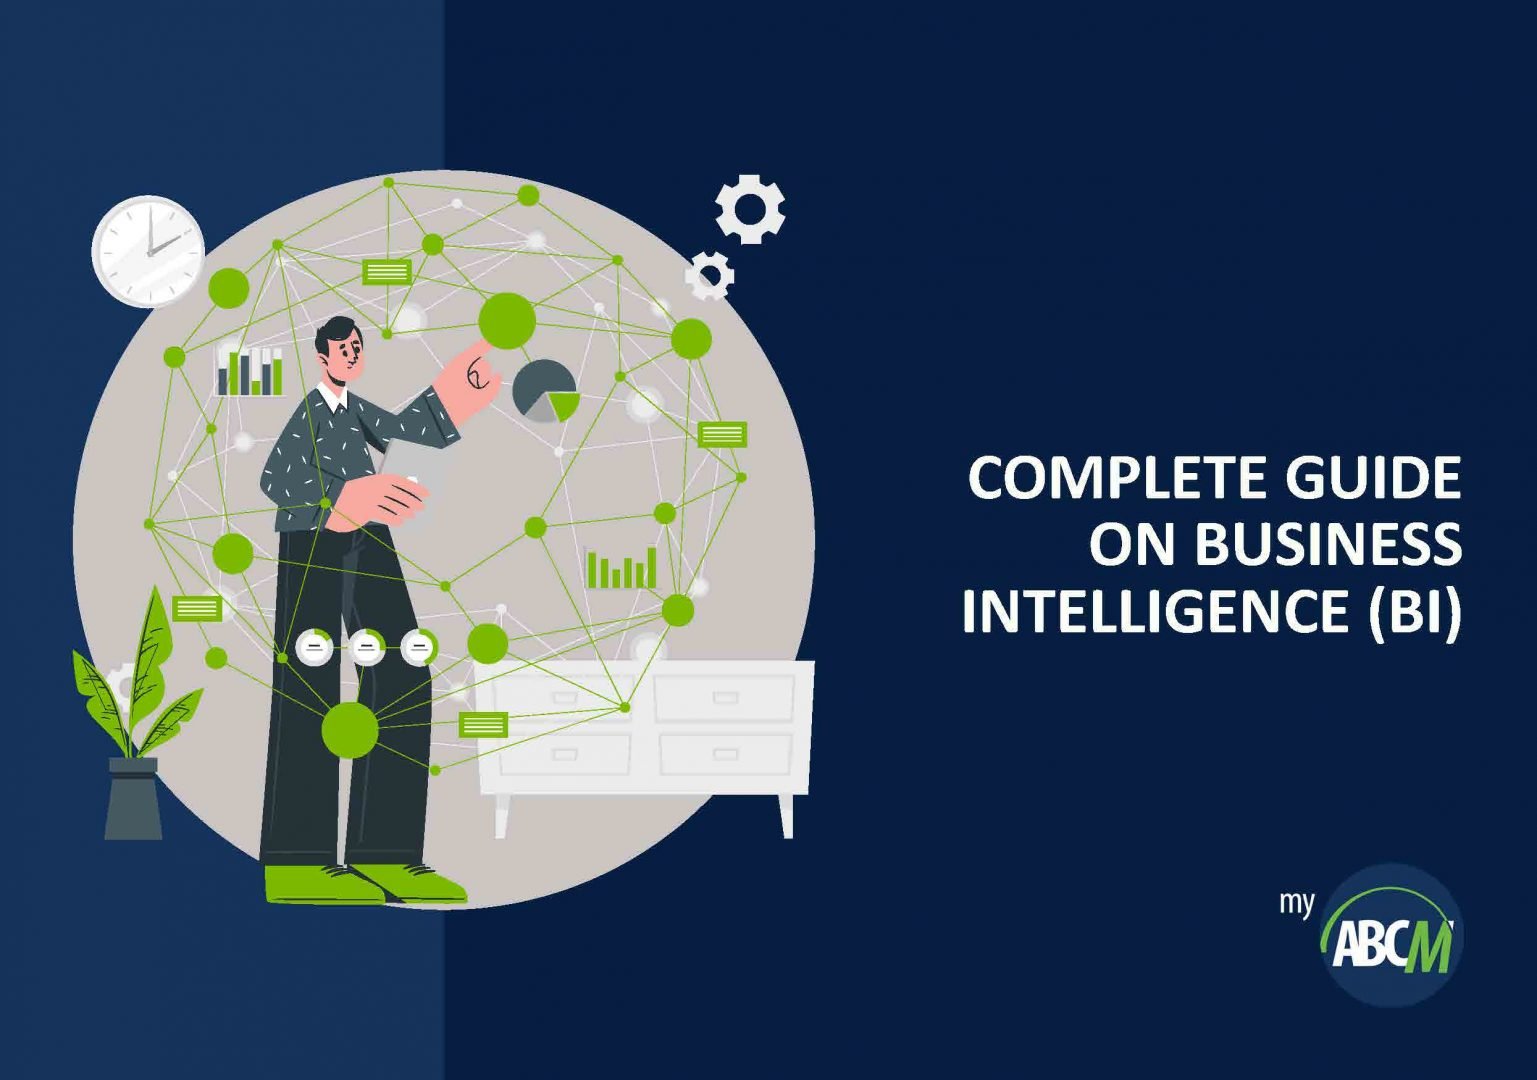 Complete guide on Business Intelligence (BI)